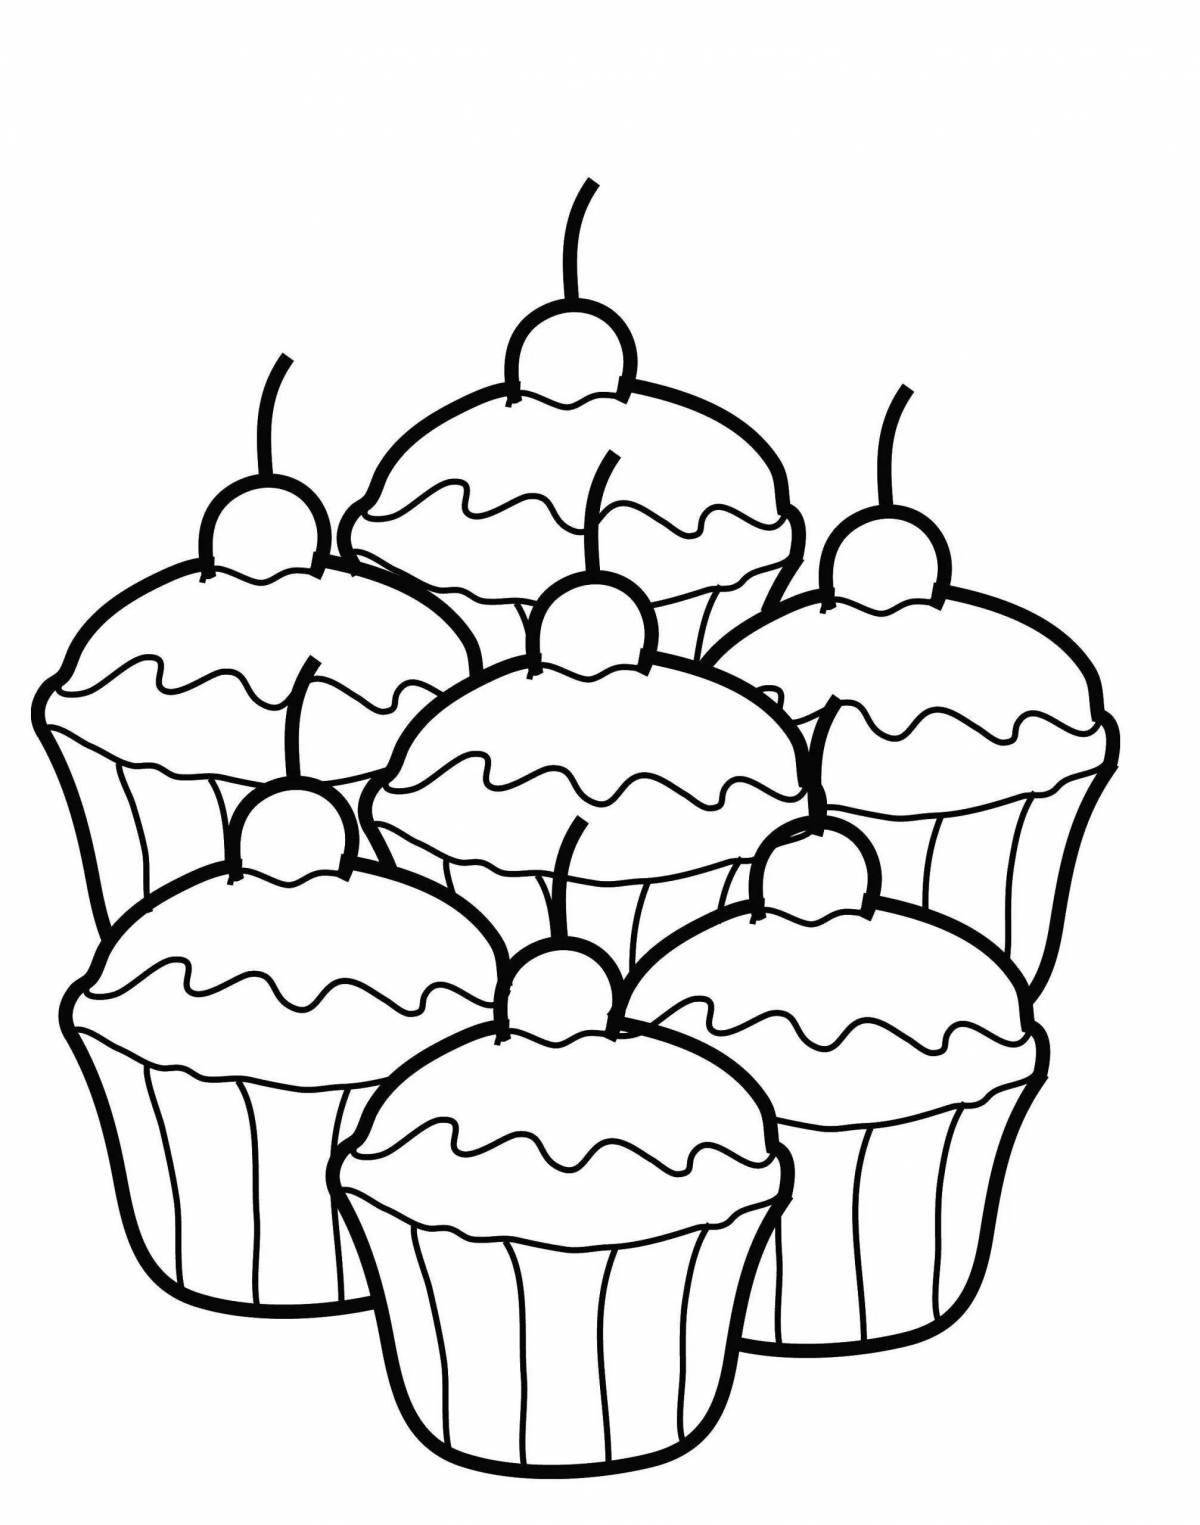 Blessed Pie coloring page